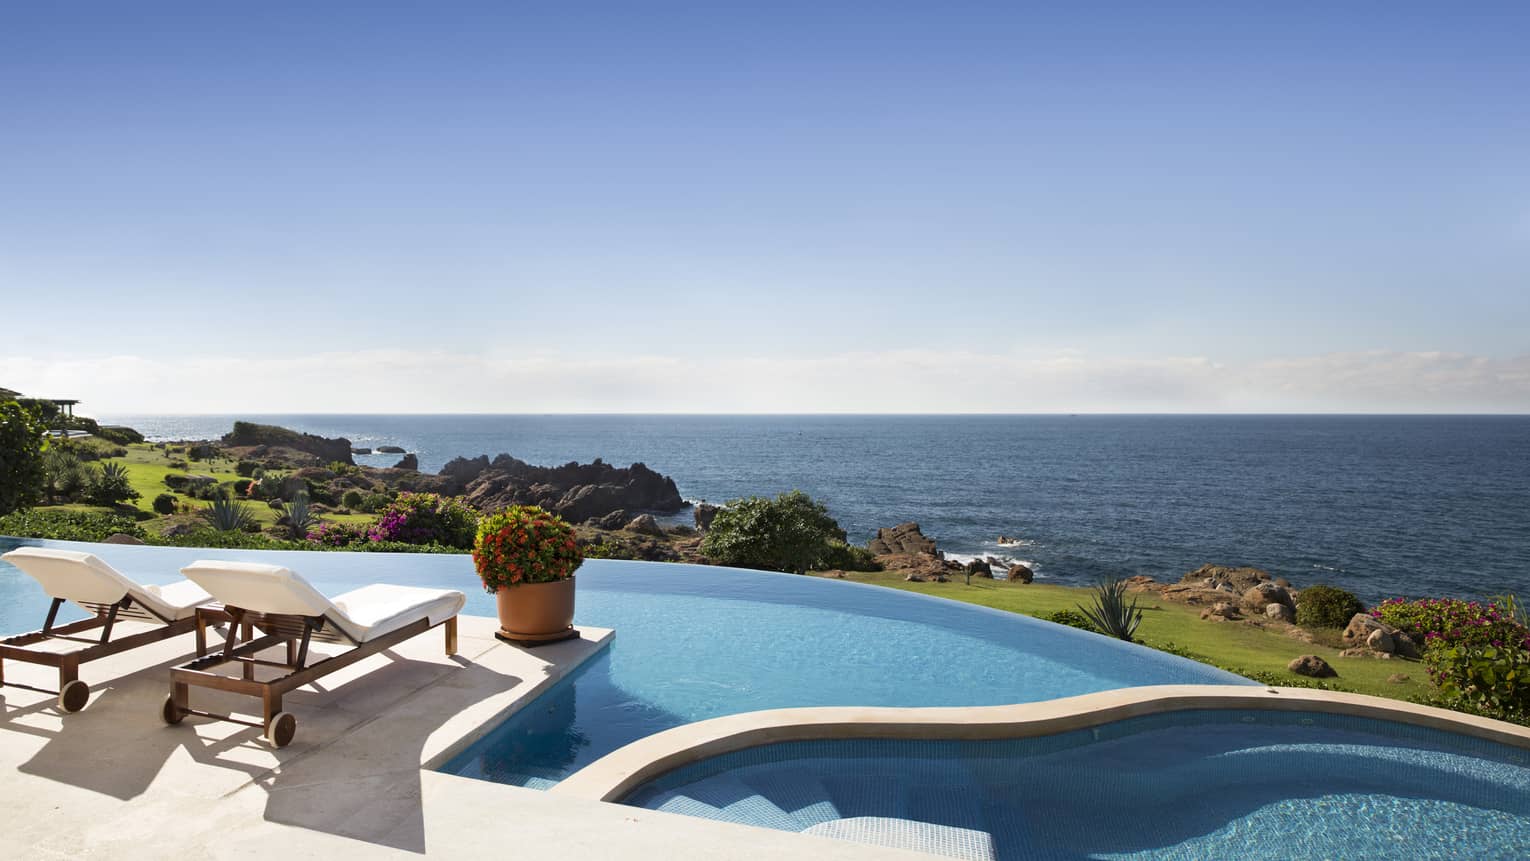 An outdoor terrace at an oceanfront villa in mexco with two lounge chairs and large infinity pool, with expansive sea views.